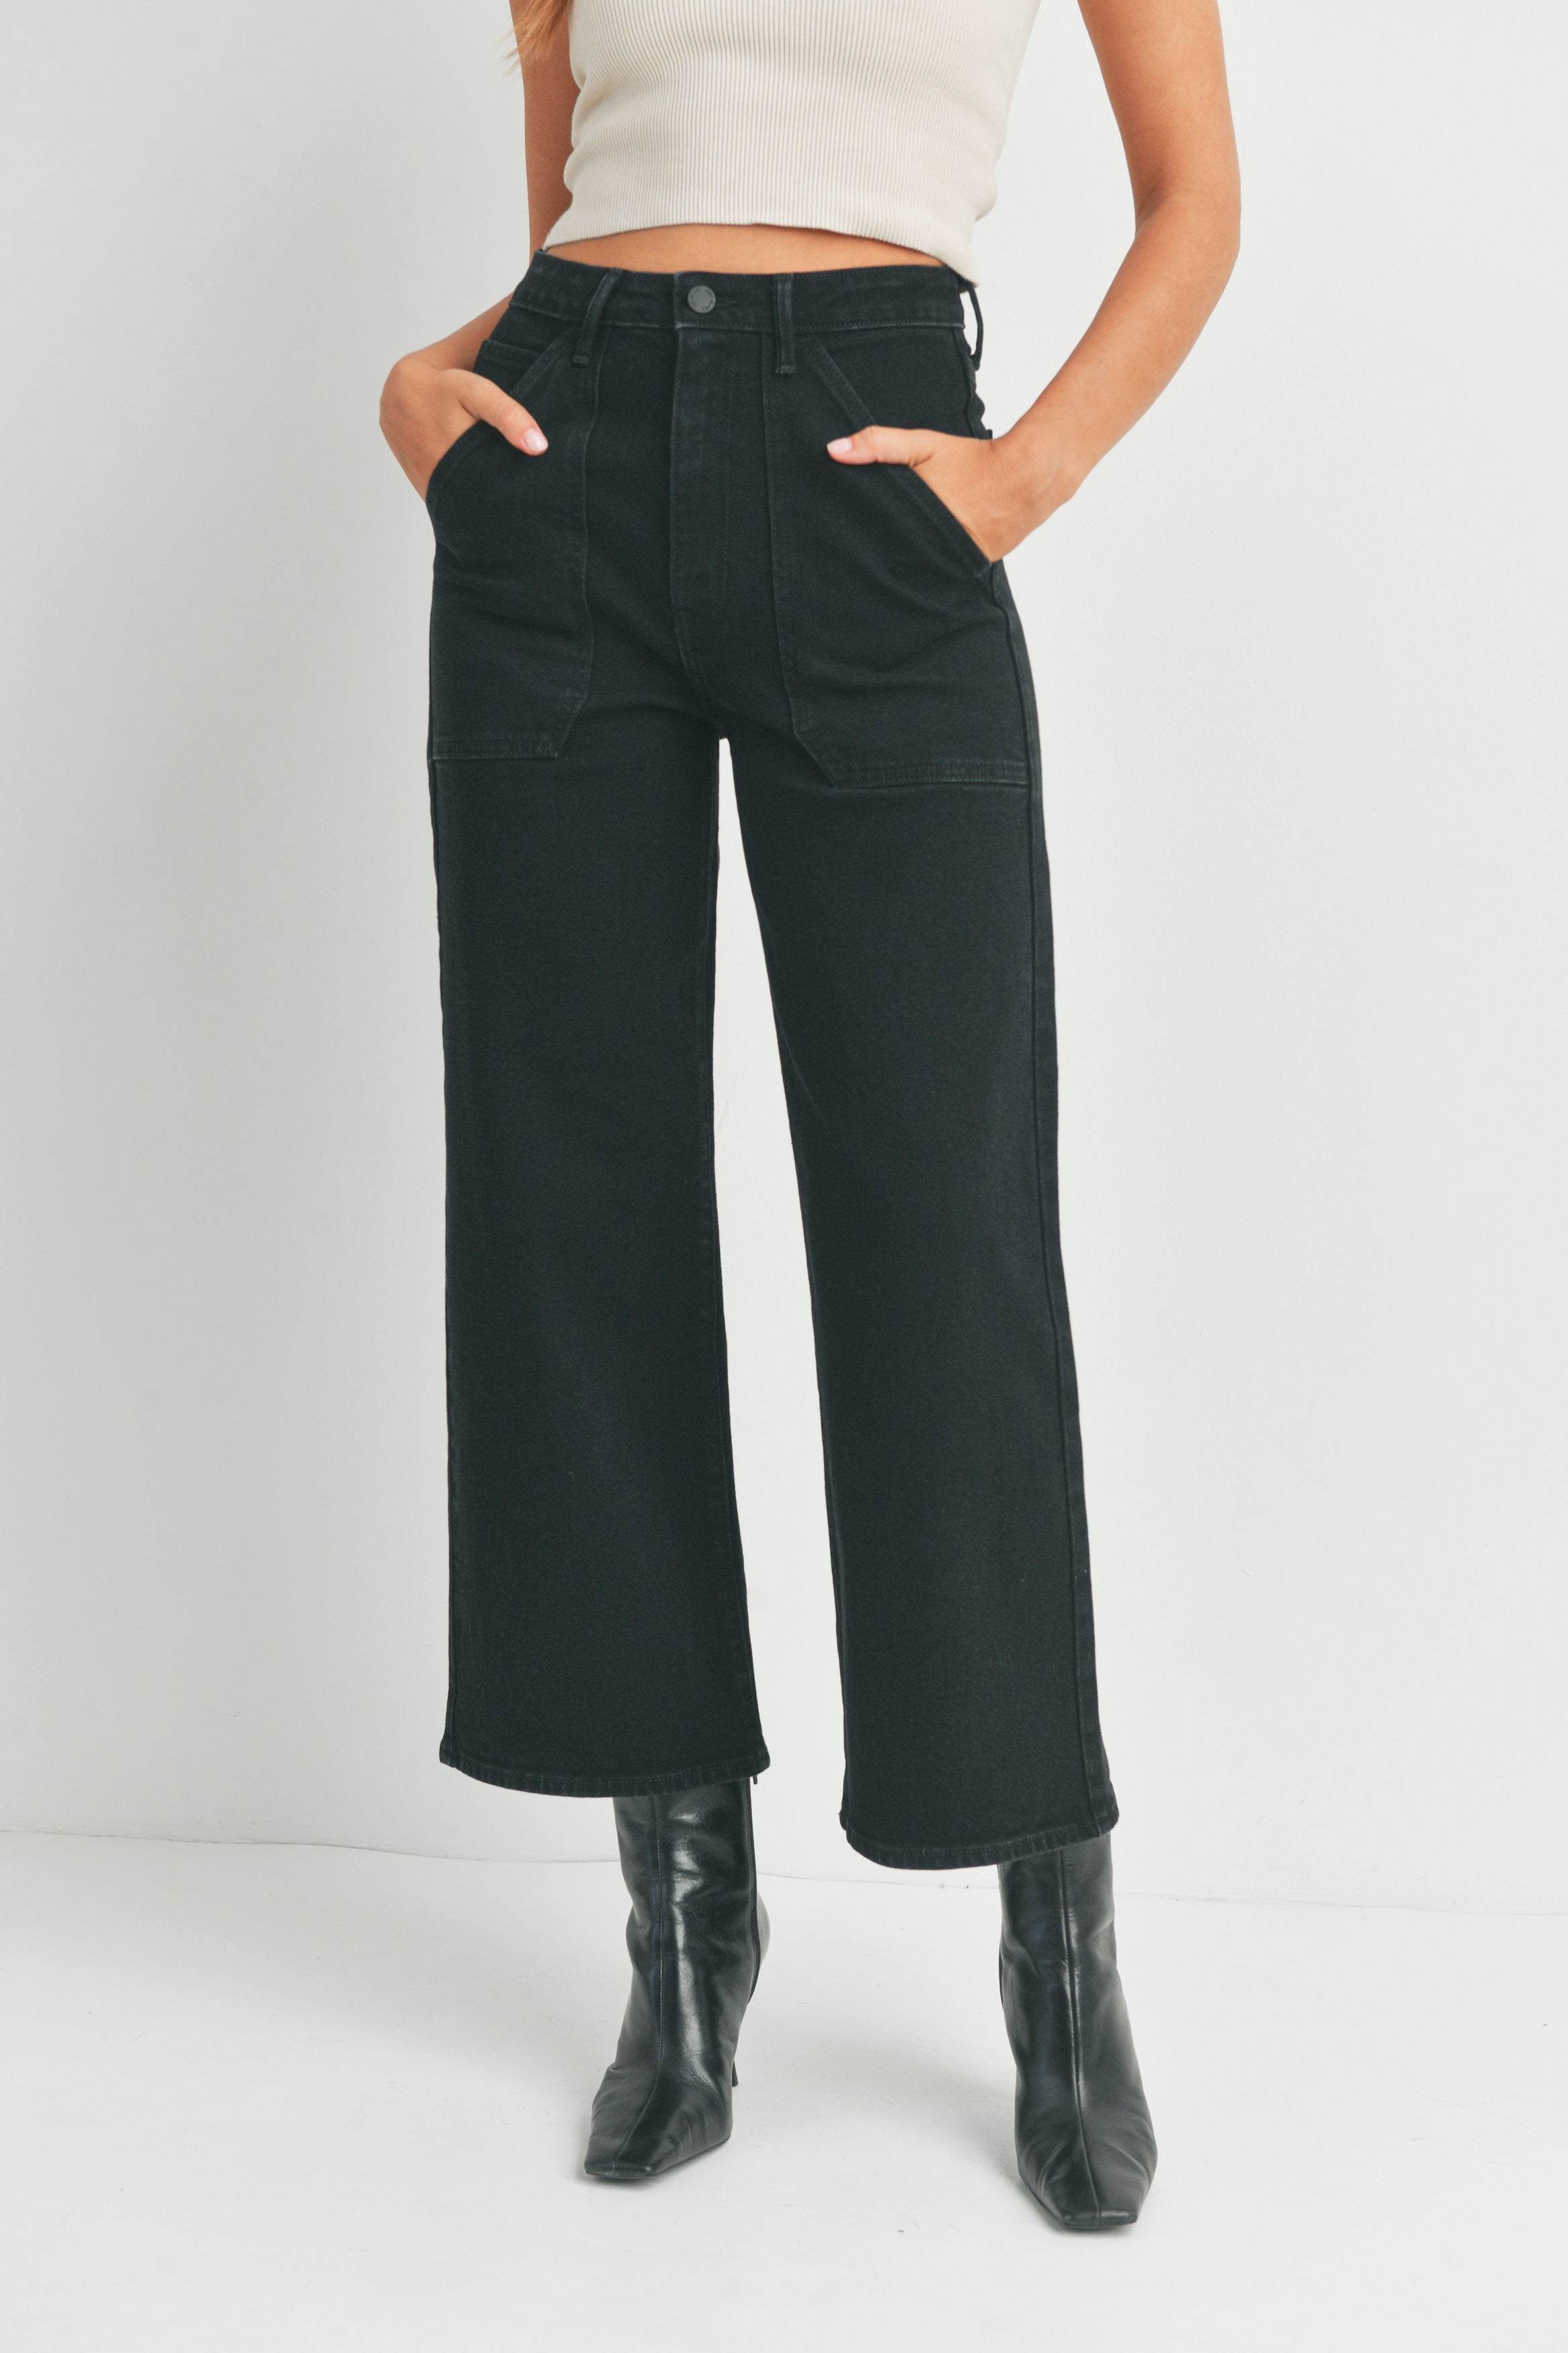 The Ramona Wide Leg Jeans by Just Black Denim – Thread + Seed